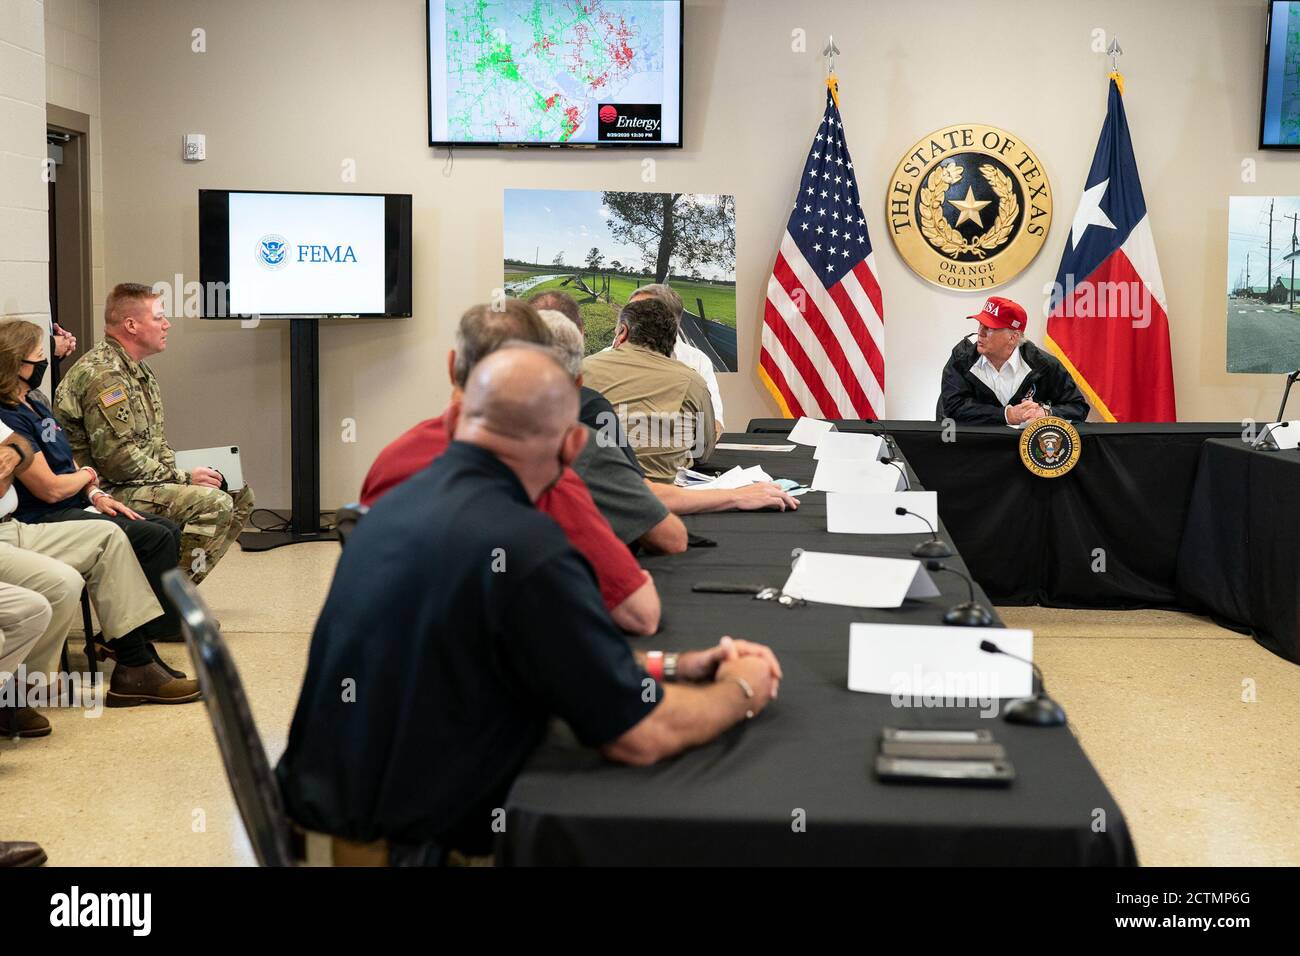 President Trump in Texas. President Donald J. Trump participates in an emergency operations center briefing at the Orange County Convention and Expo Center in Orange, Texas, Saturday, Aug, 29, 2020, as part of President Trump’s visit to areas impacted by Hurricane Laura. Stock Photo